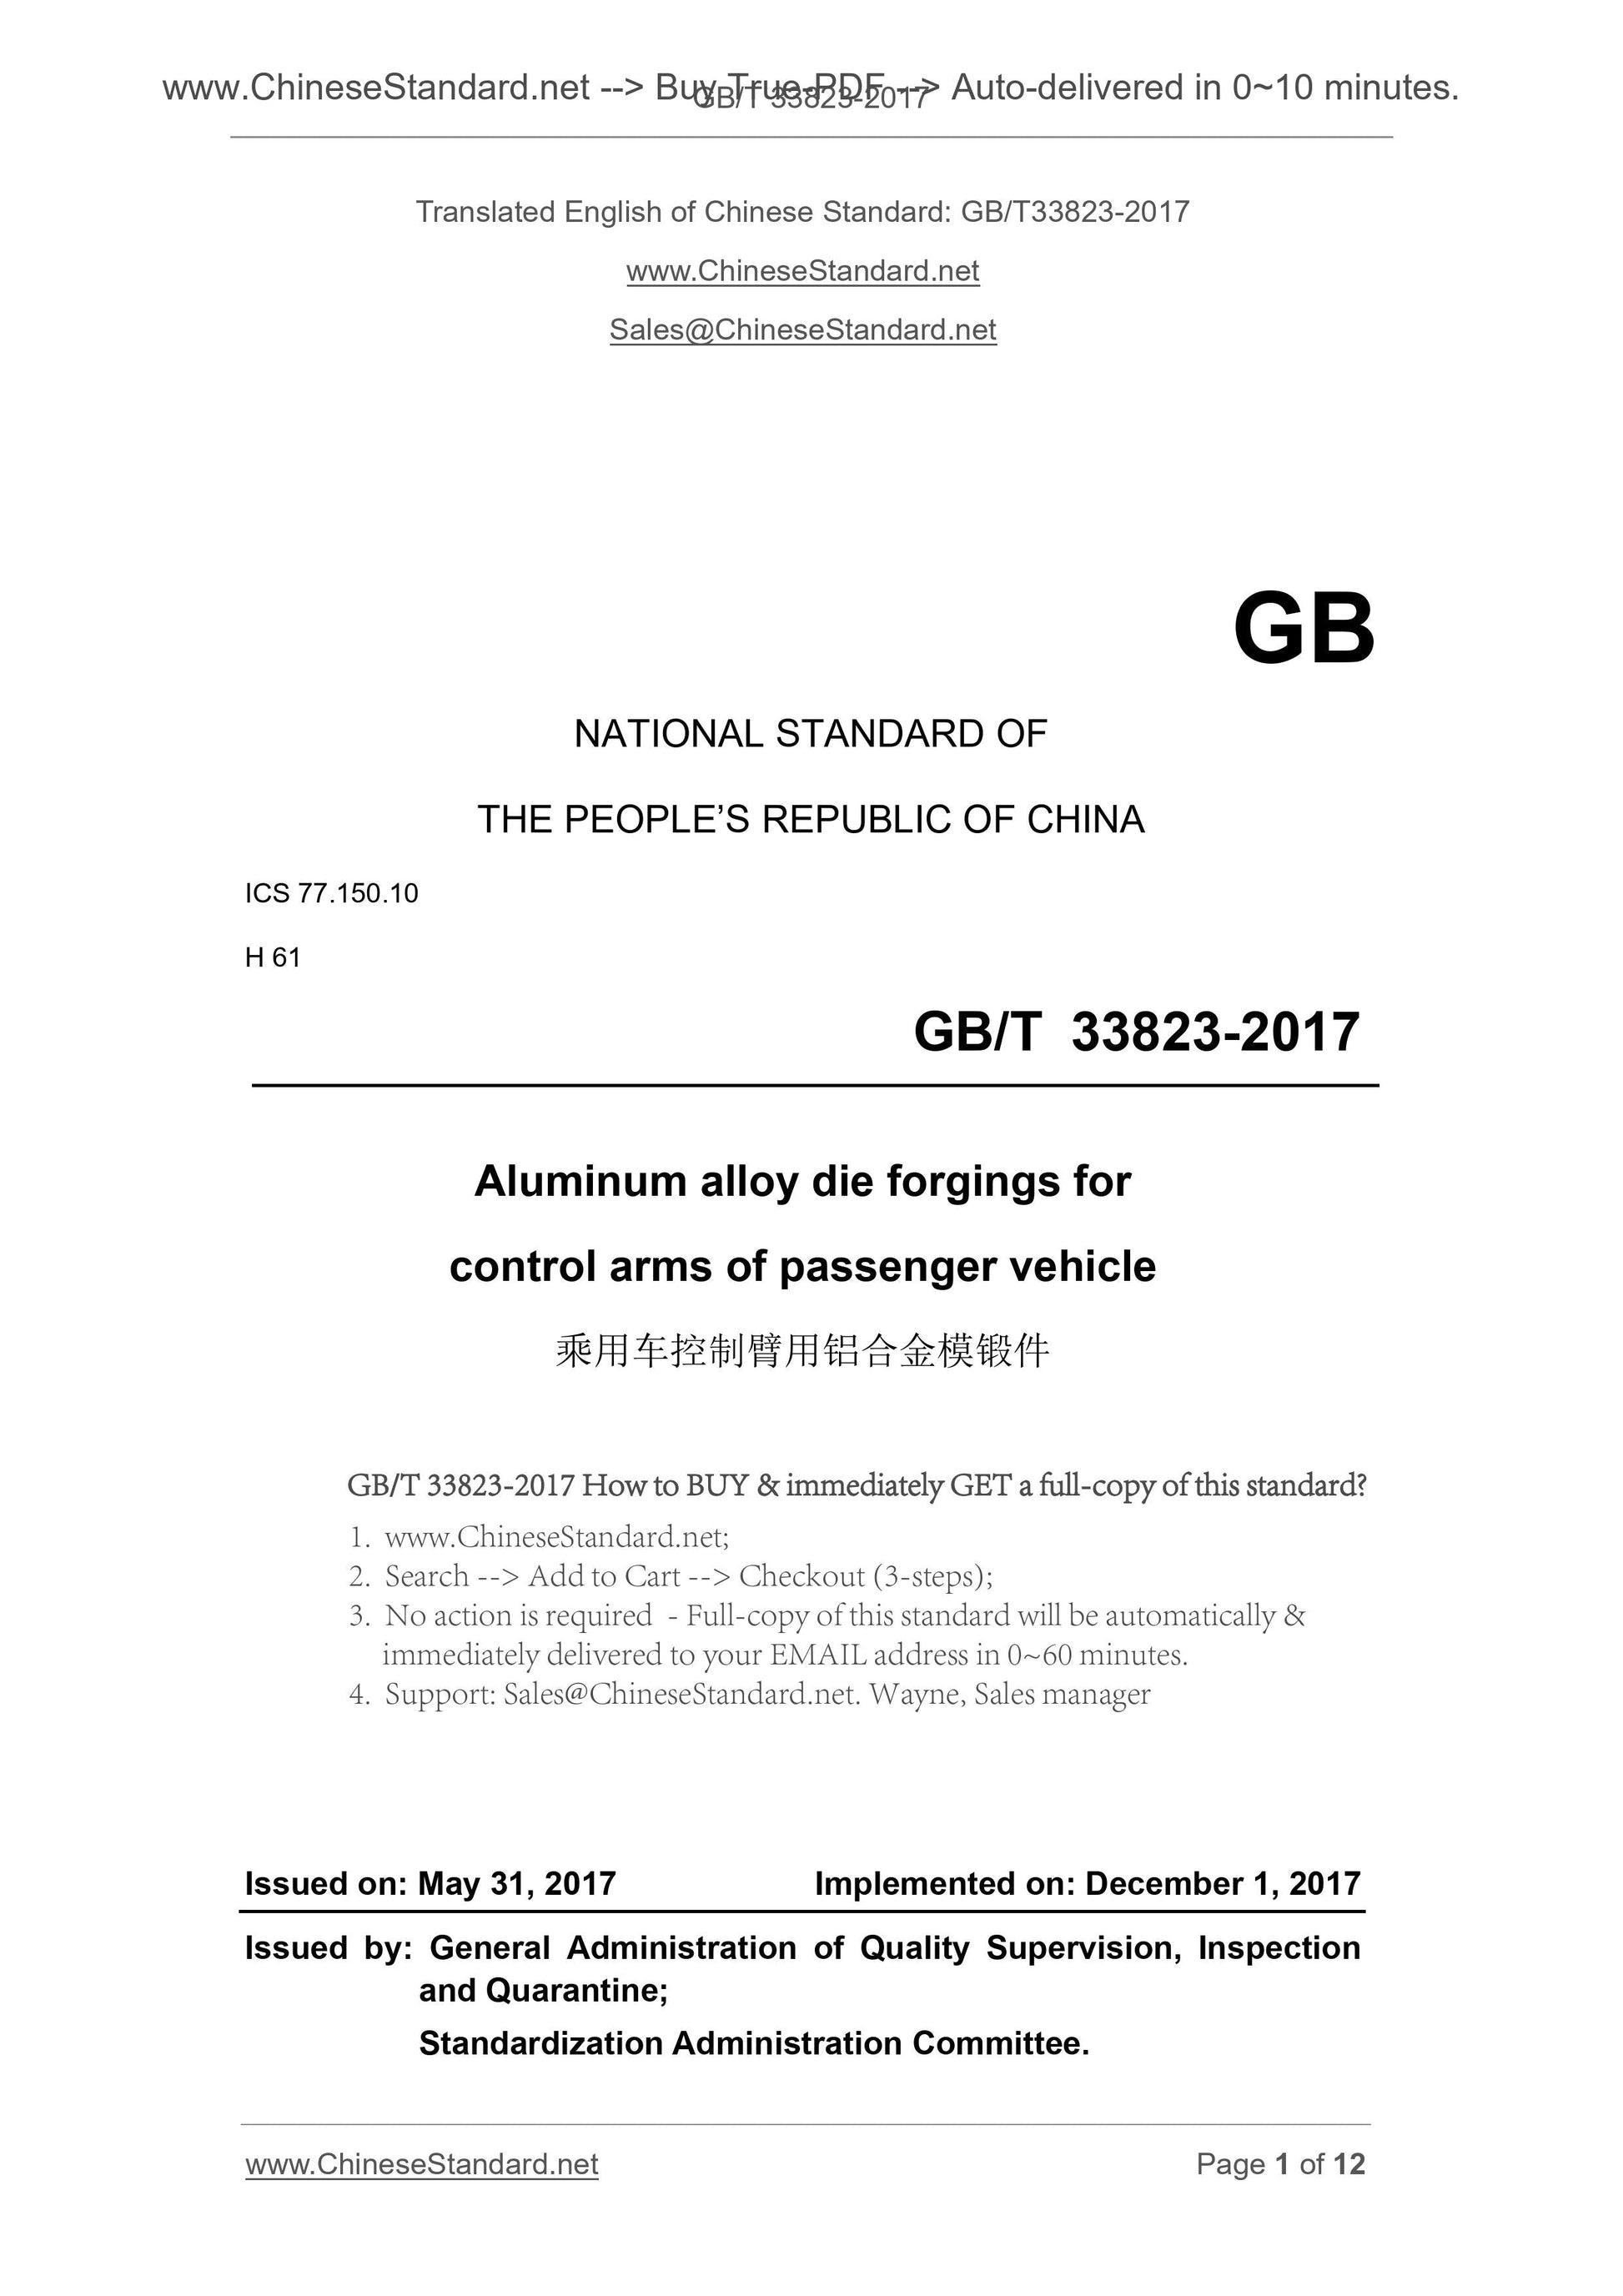 GB/T 33823-2017 Page 1